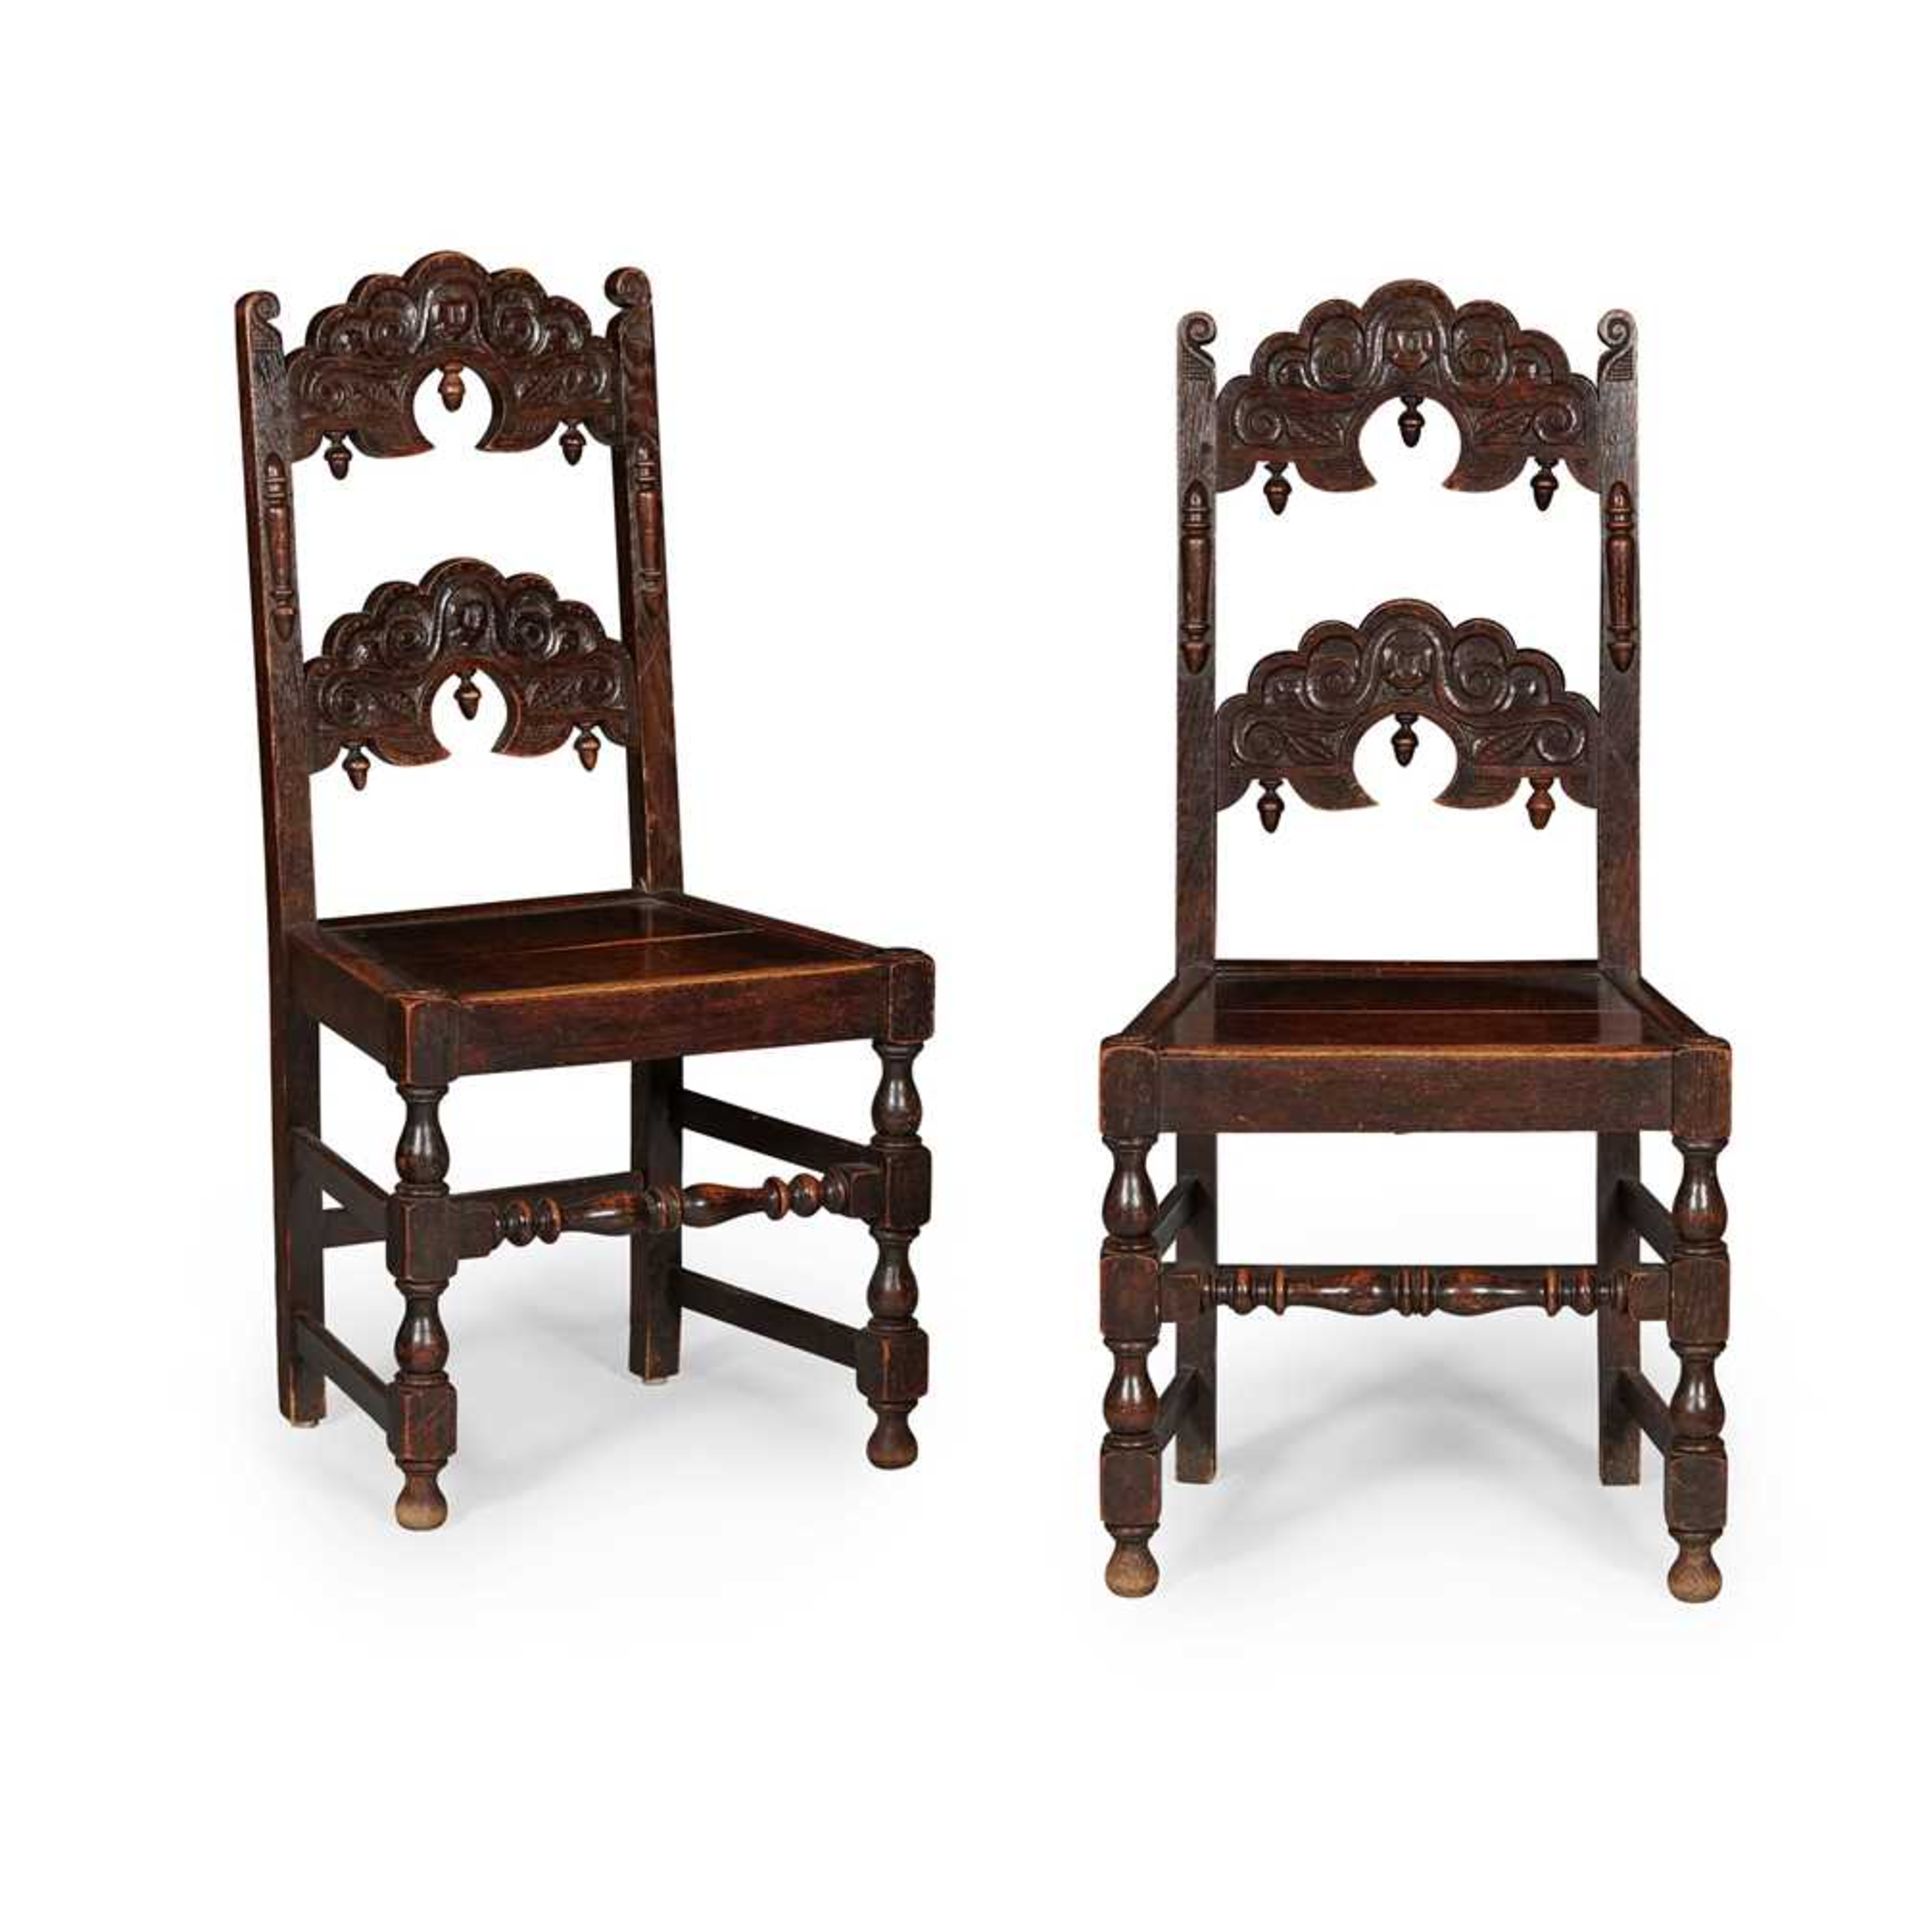 PAIR OF OAK SIDE CHAIRS, SOUTH YORKSHIRE EARLY 18TH CENTURY